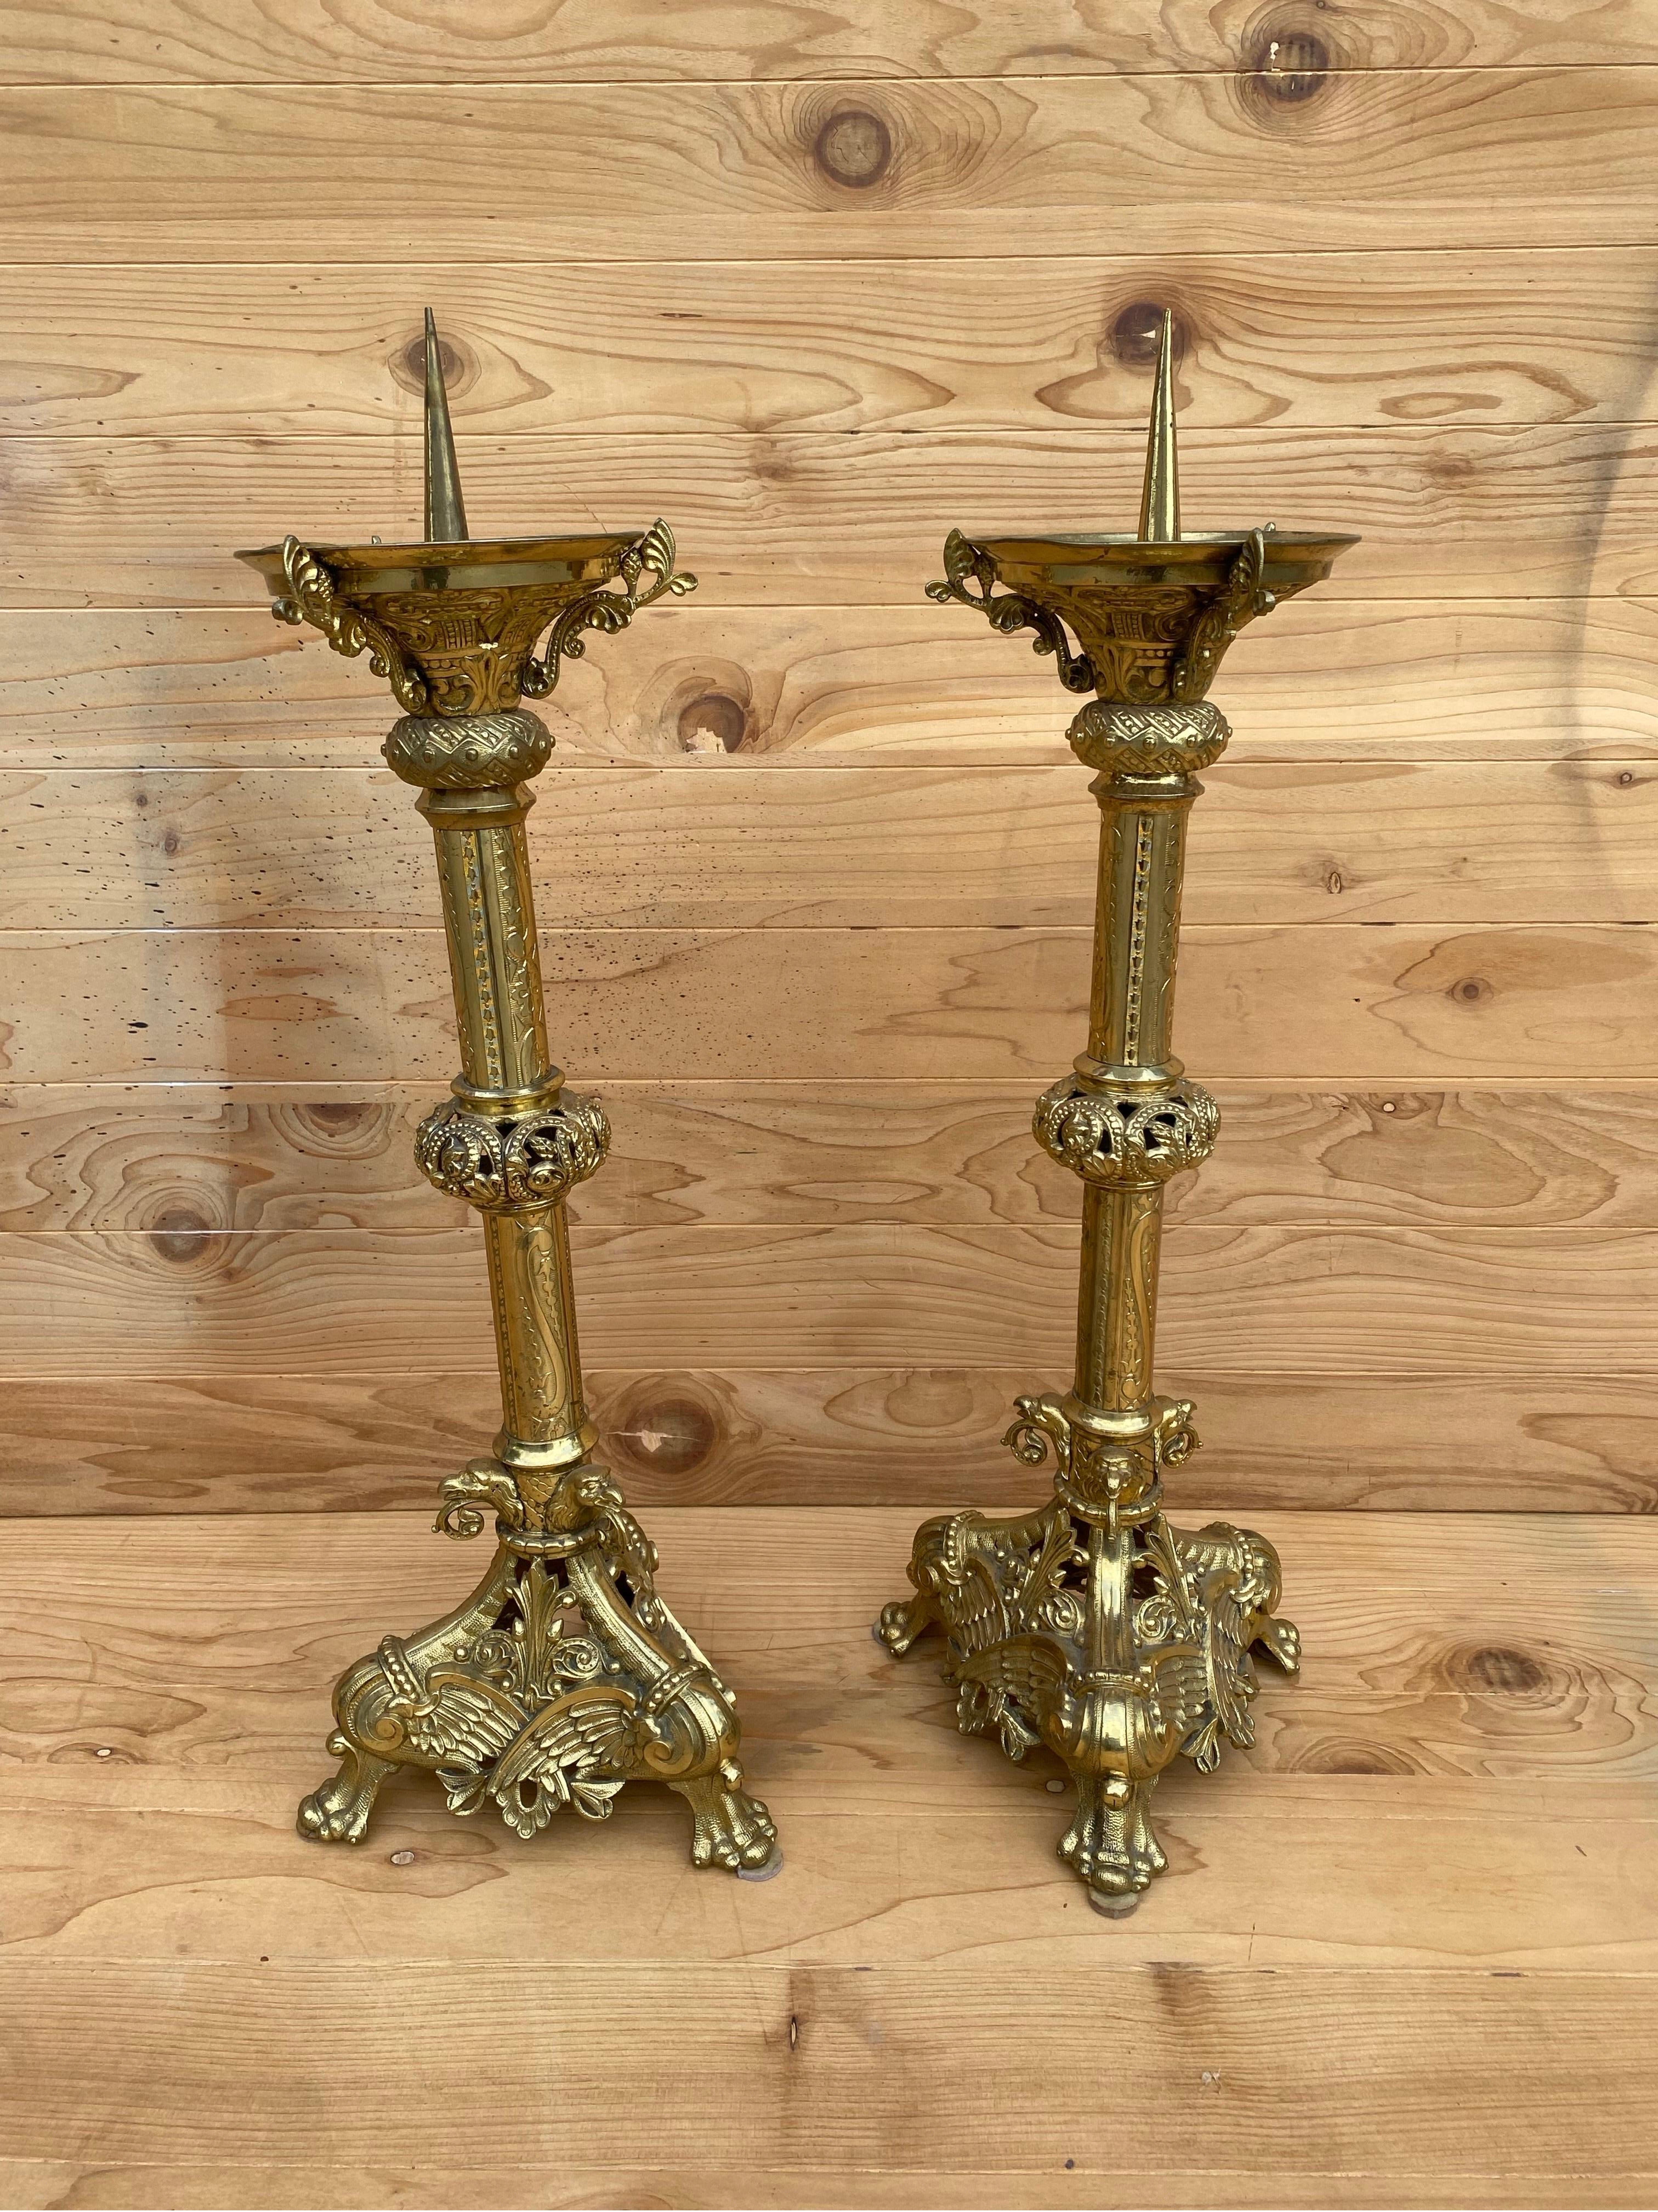 Antique French Ornate Gilt Bronze Ormolu Pricket Candlesticks - Pair

This rare matching set of antique solid brass handcrafted candle holders rest on triangular shaped base with lion paw feet. The entire body of the candlesticks are decorated with